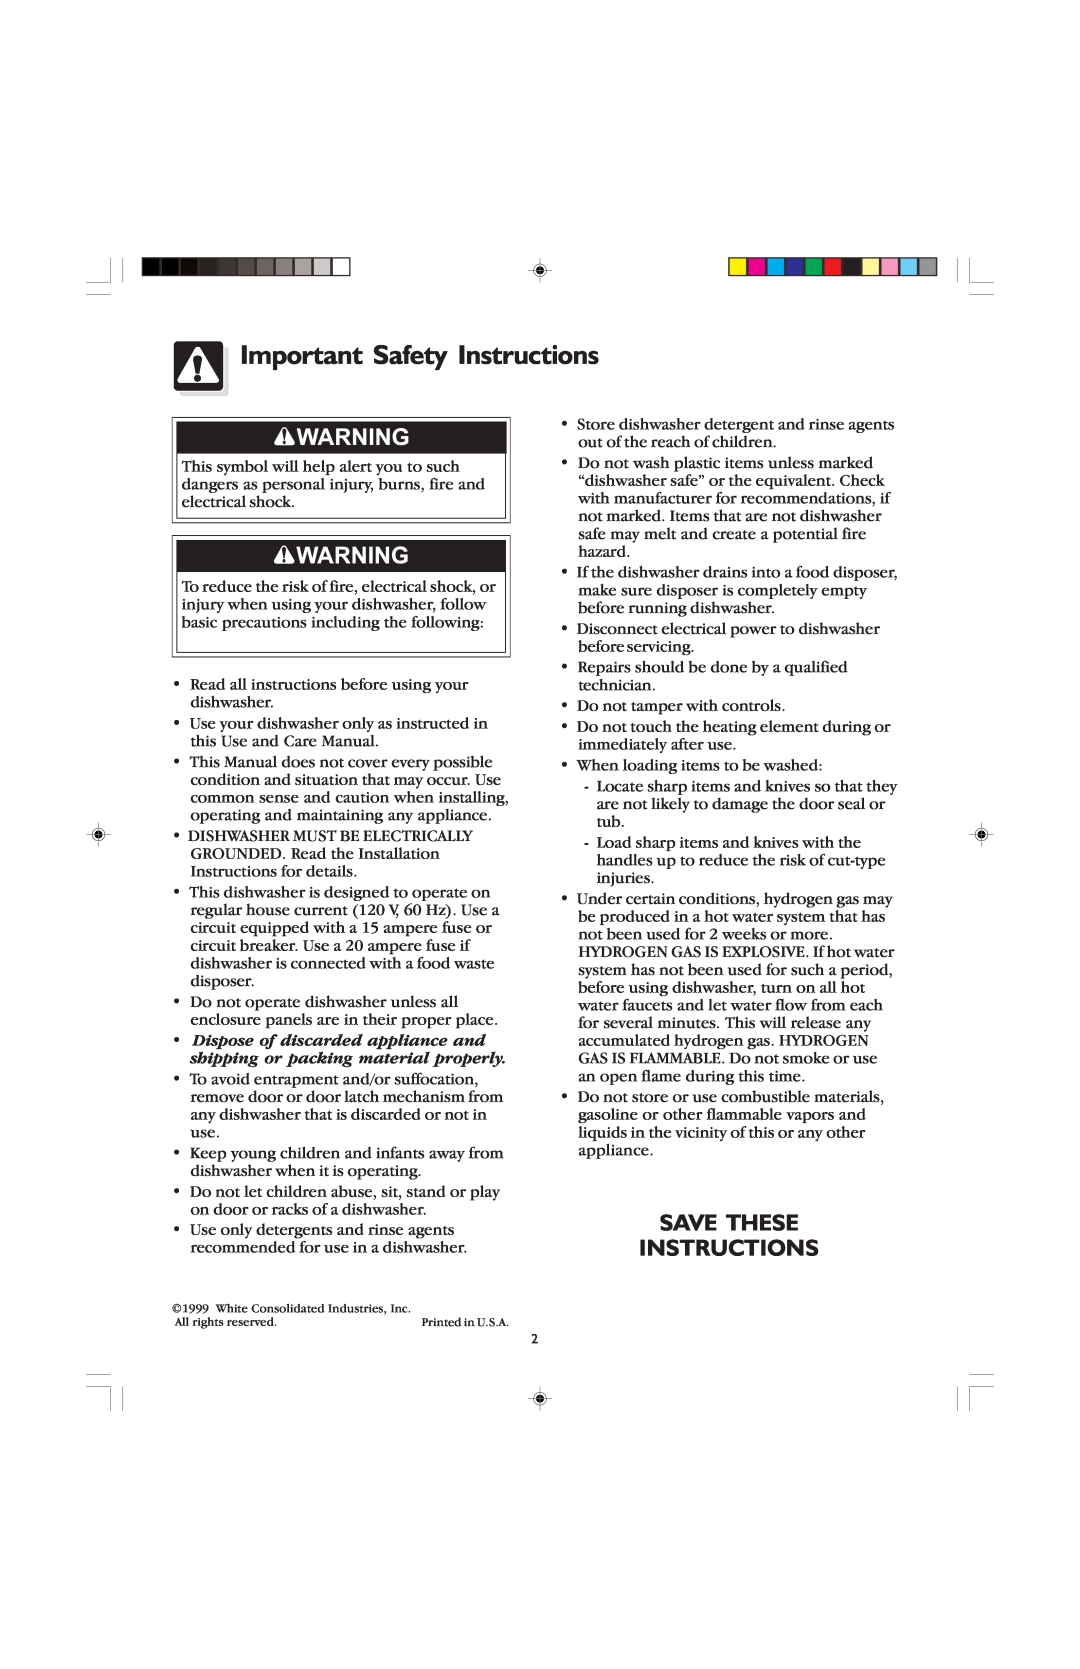 Frigidaire 400, 100 warranty Important Safety Instructions, Save These Instructions 